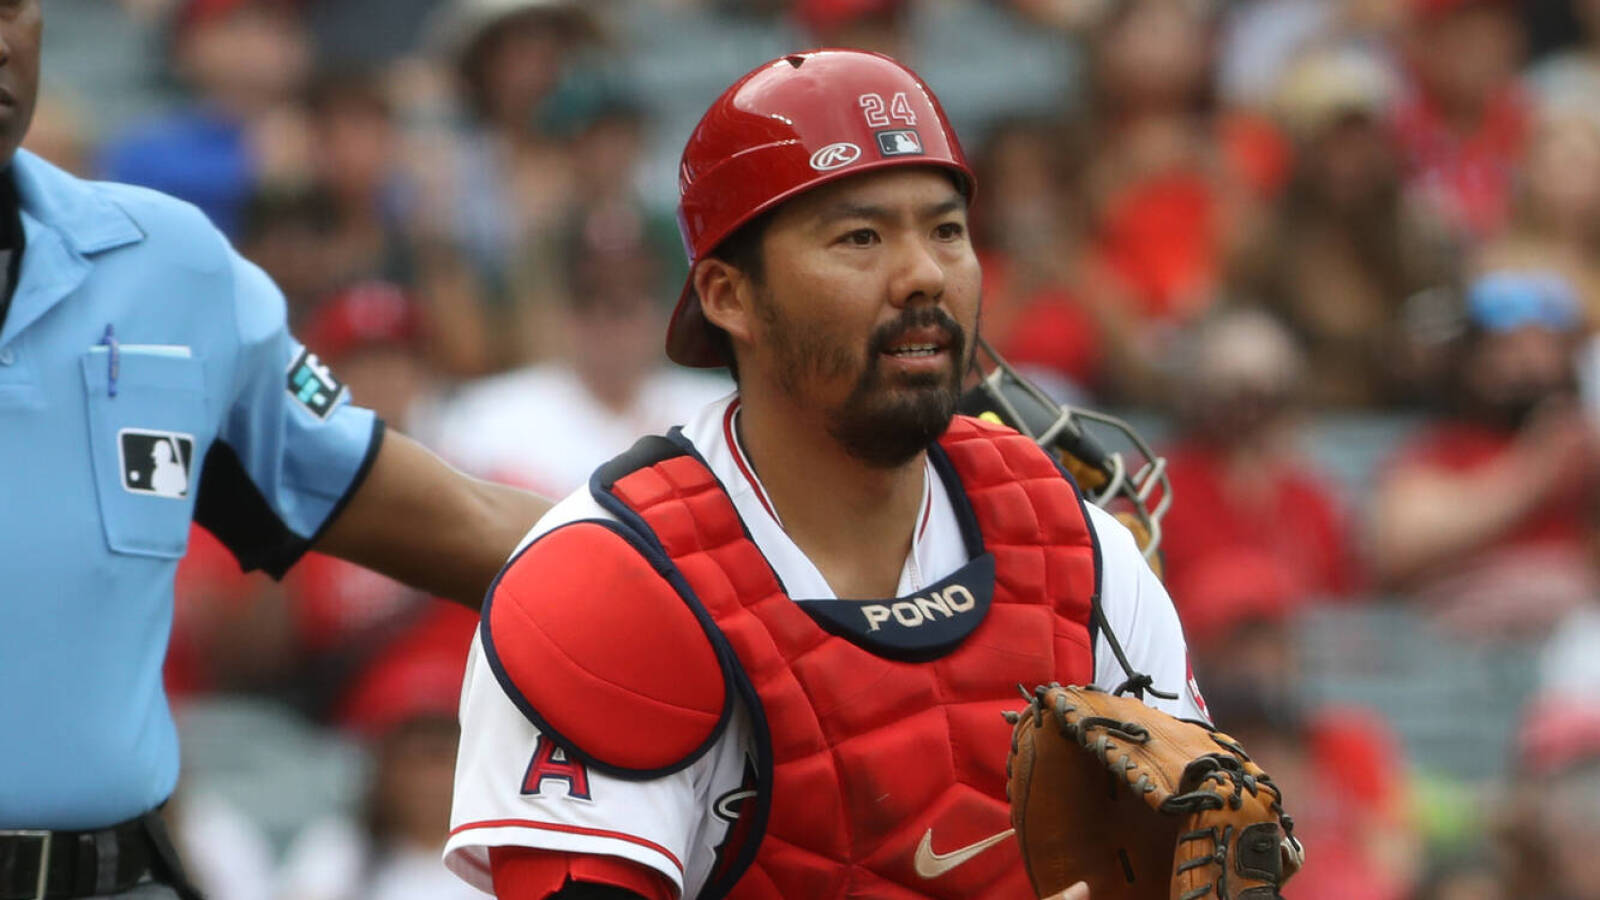 Angels' Kurt Suzuki suffers neck contusion after scary incident